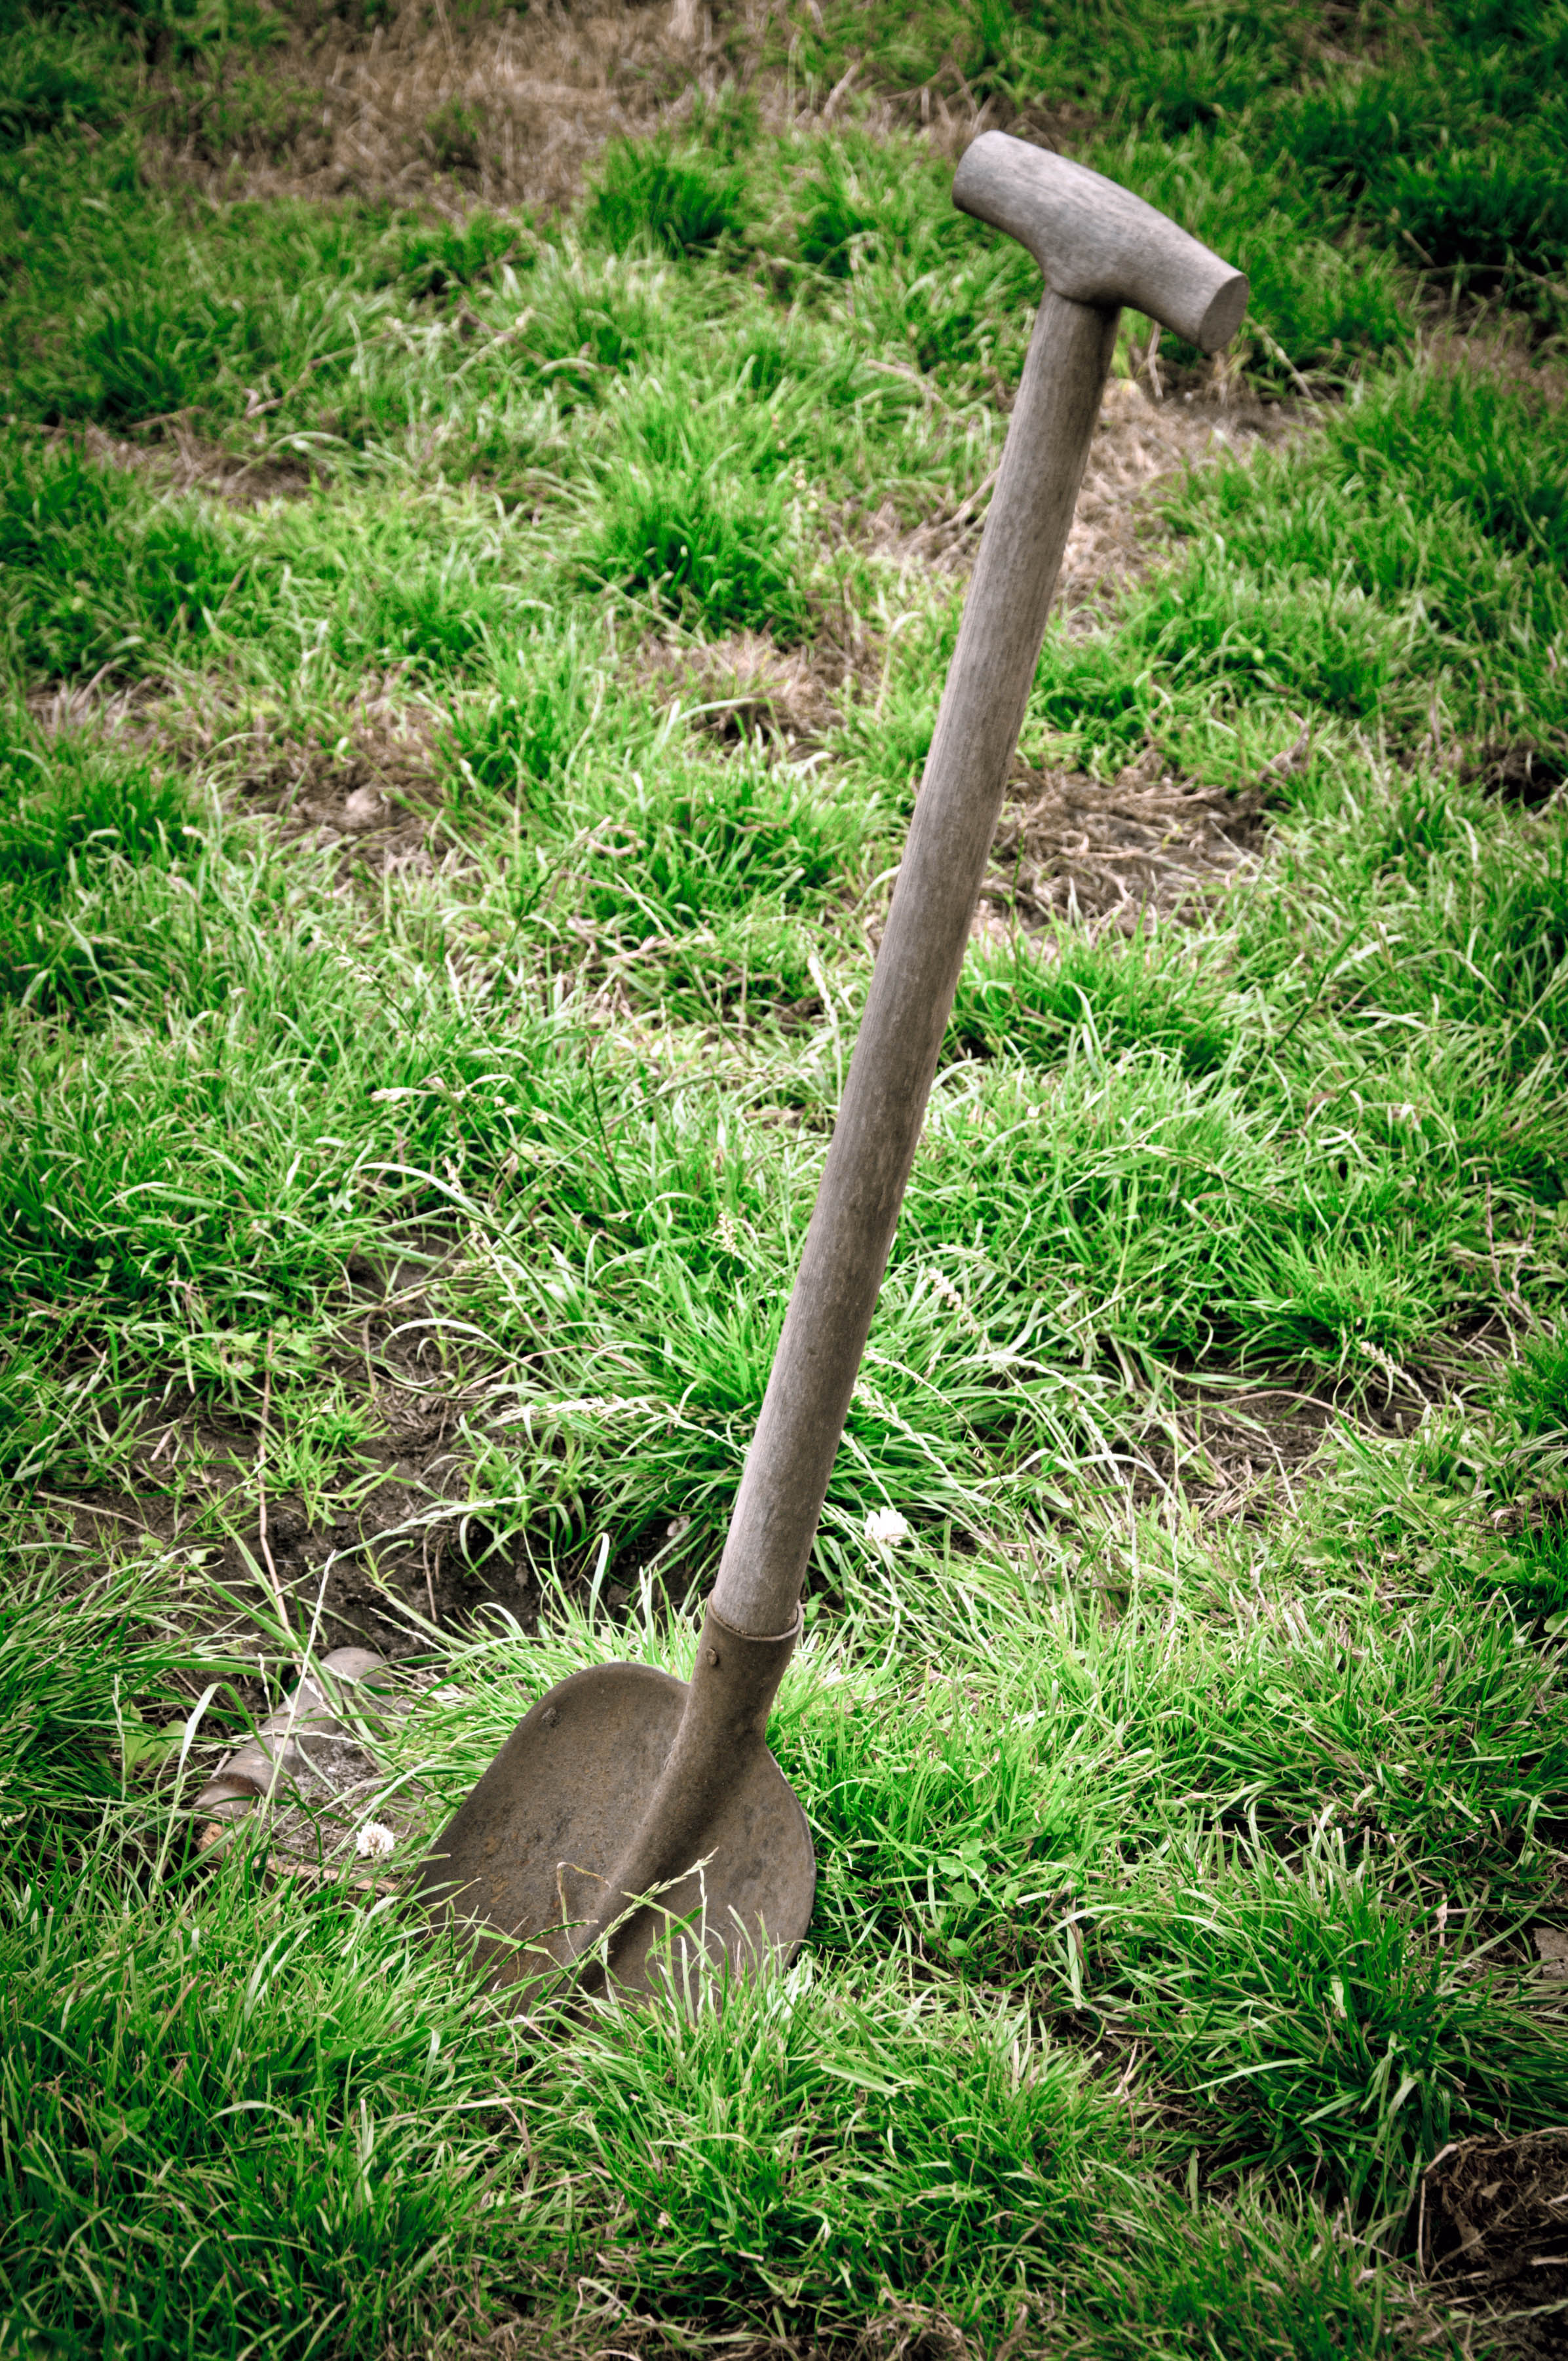 Shovel, Agriculture, Working, Work, Tools, HQ Photo